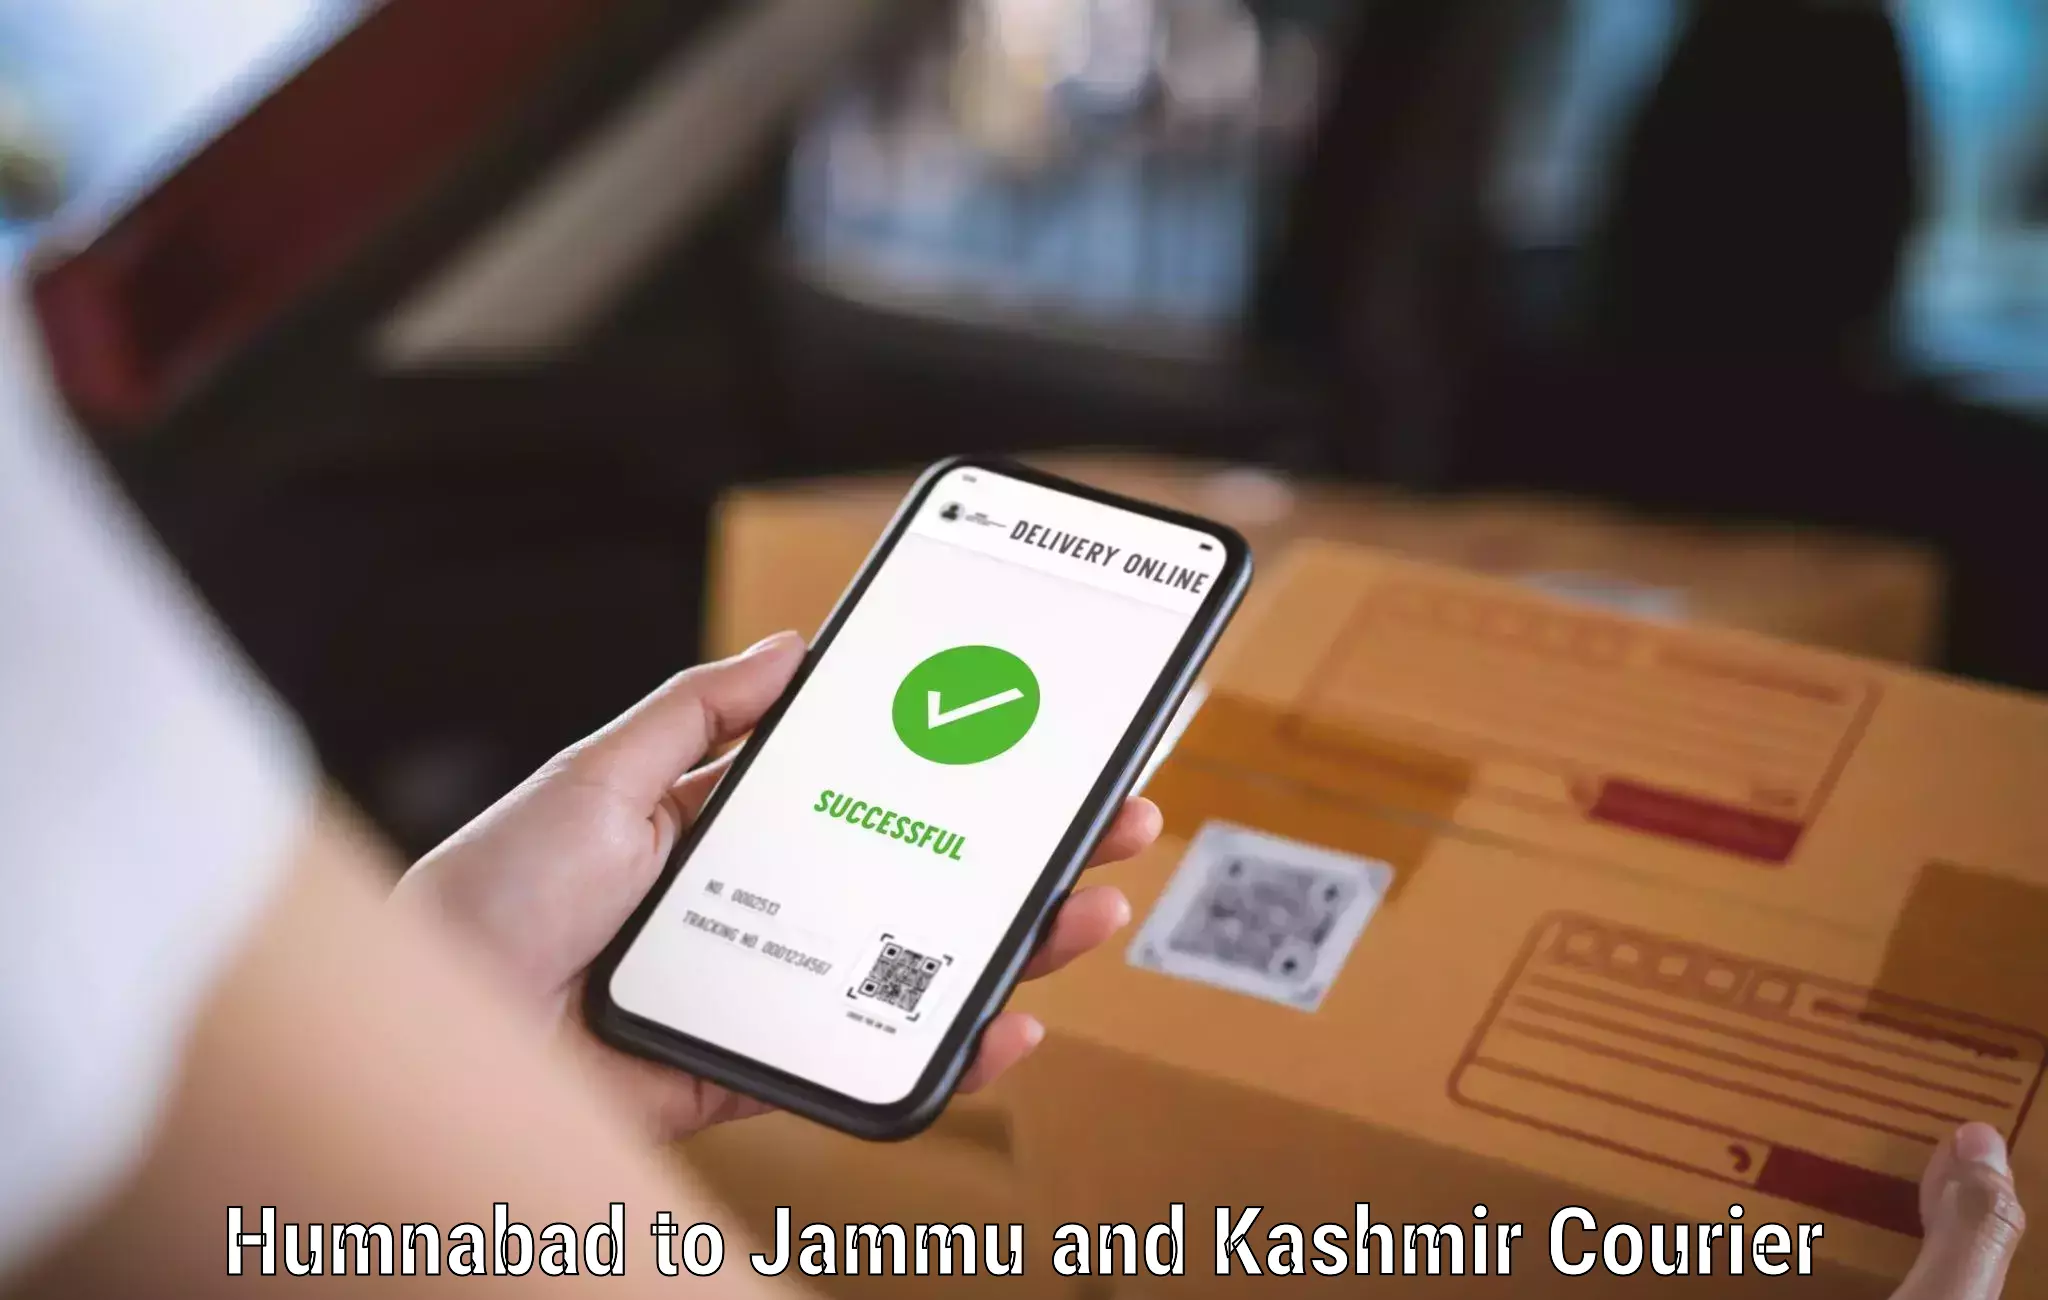 Full-service courier options Humnabad to Jammu and Kashmir